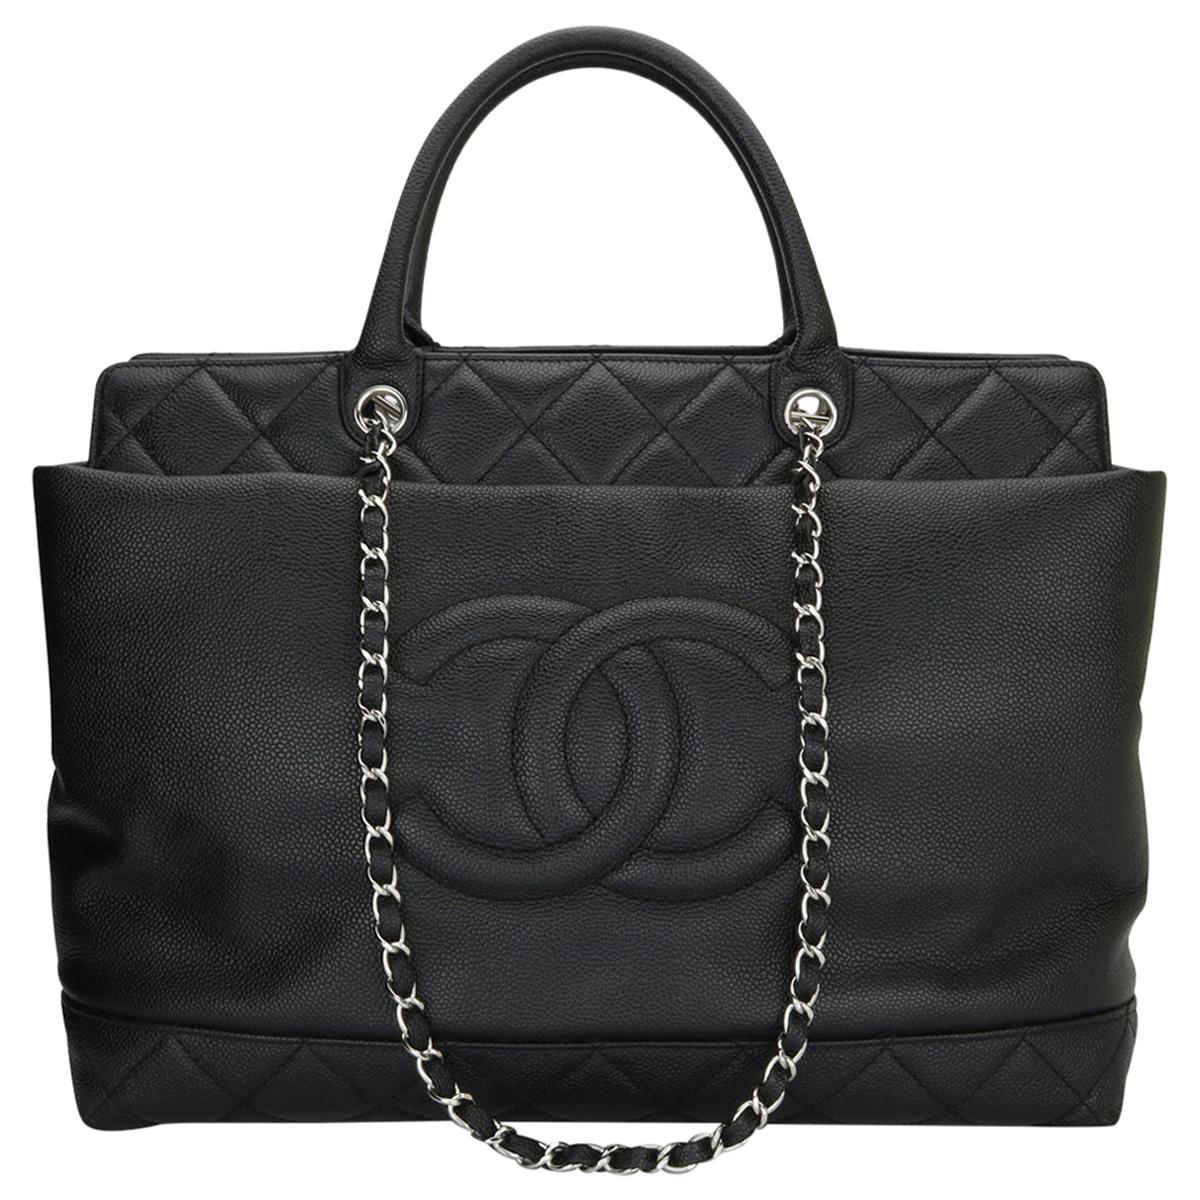 CHANEL Large Shopping Tote Bag Black Caviar with Silver Hardware